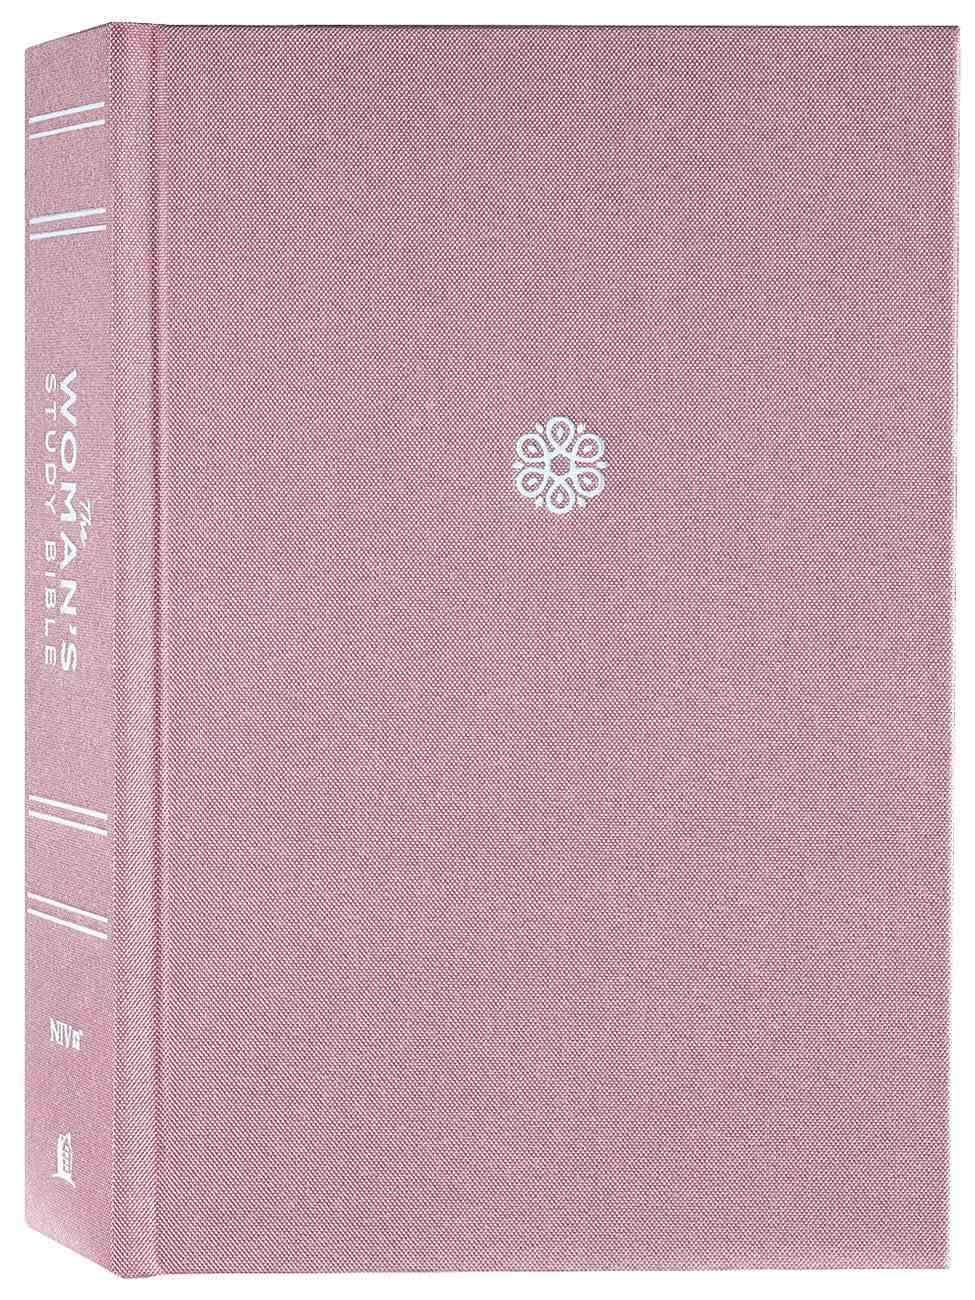 NIV, The Woman's Study Bible, Cloth Over Board, Pink, Full-color, Red Letter